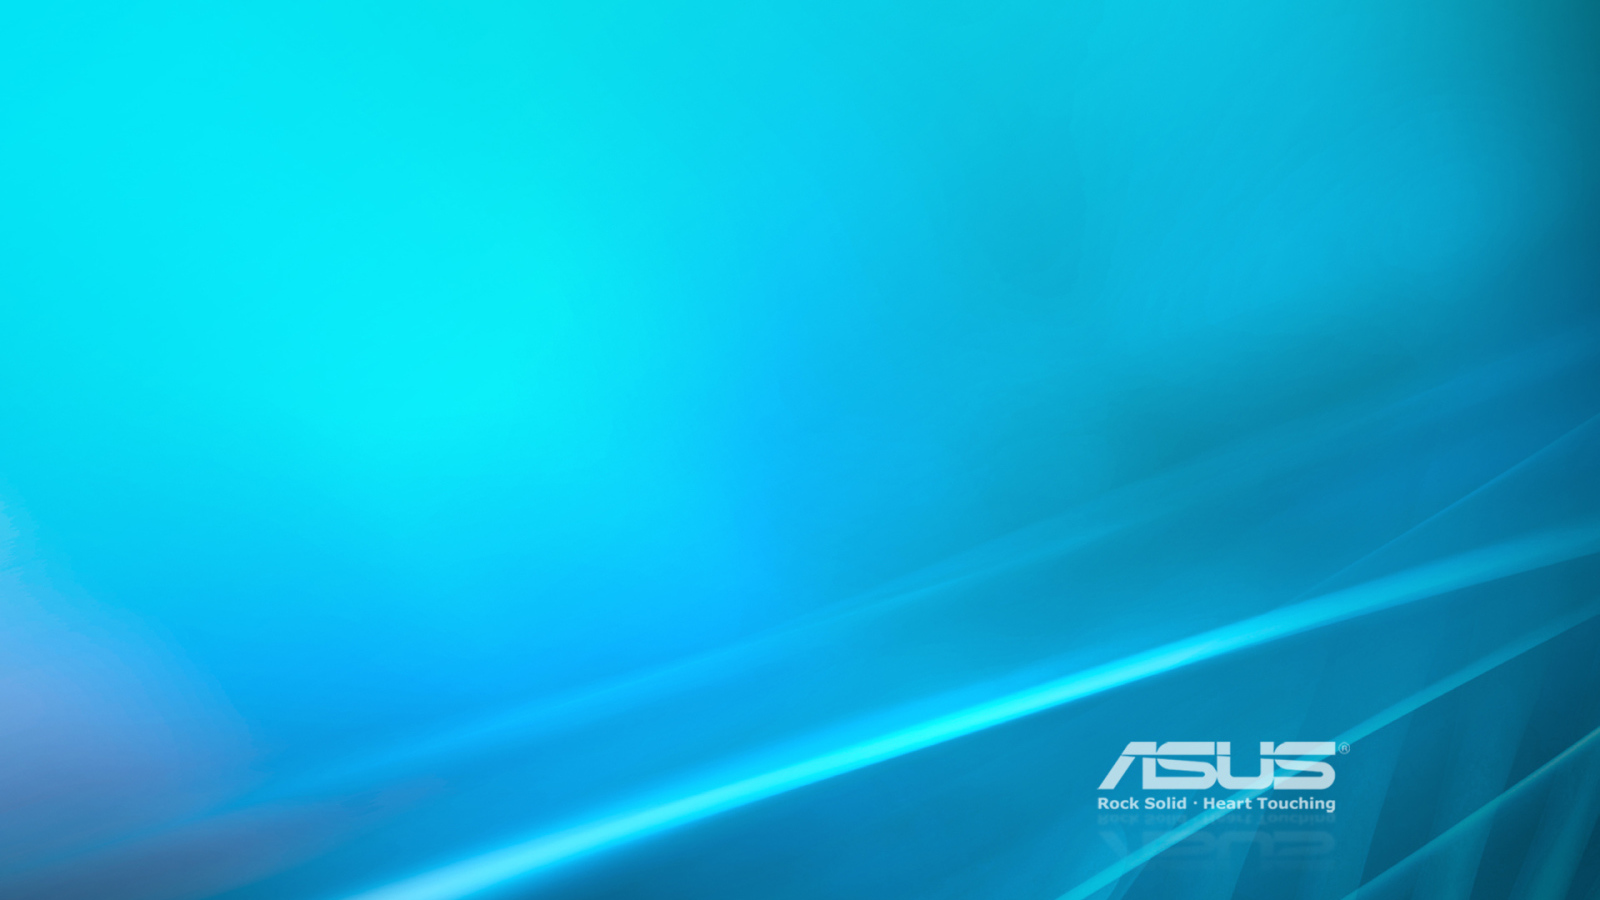 Background image ASUS